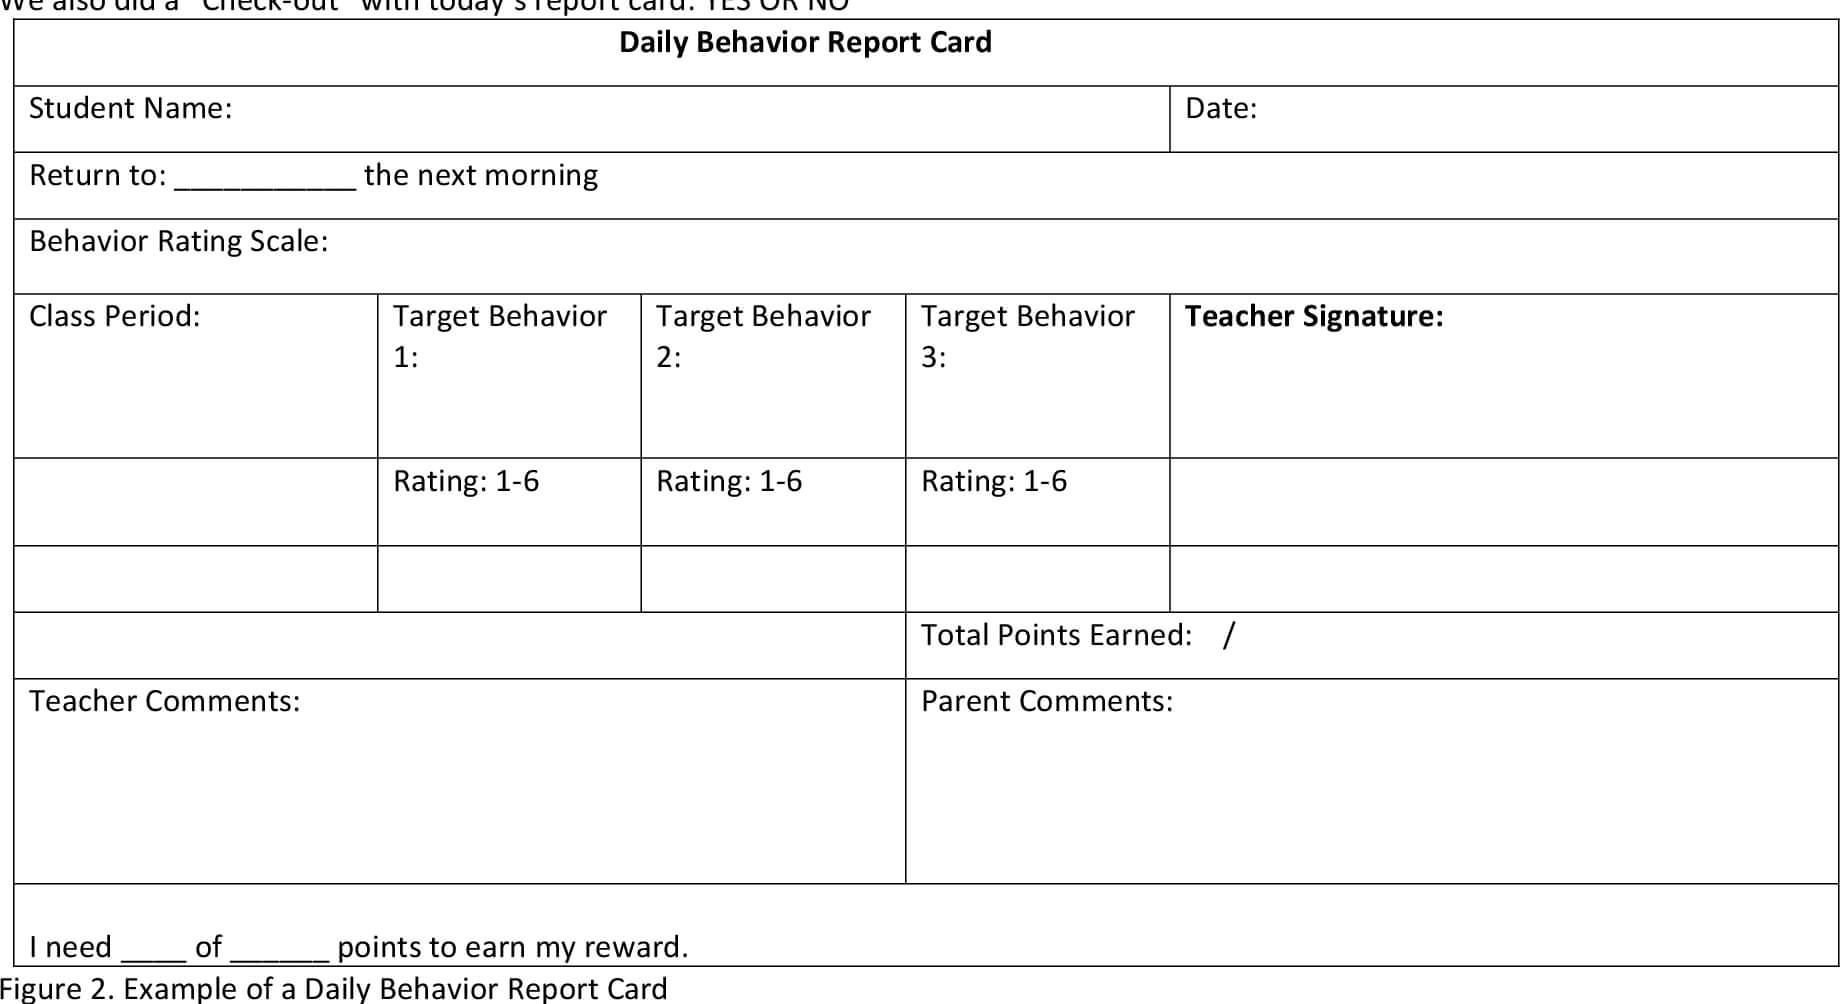 Pdf] A Synthesis Of The Daily Behavior Report Card Within Daily Report Card Template For Adhd